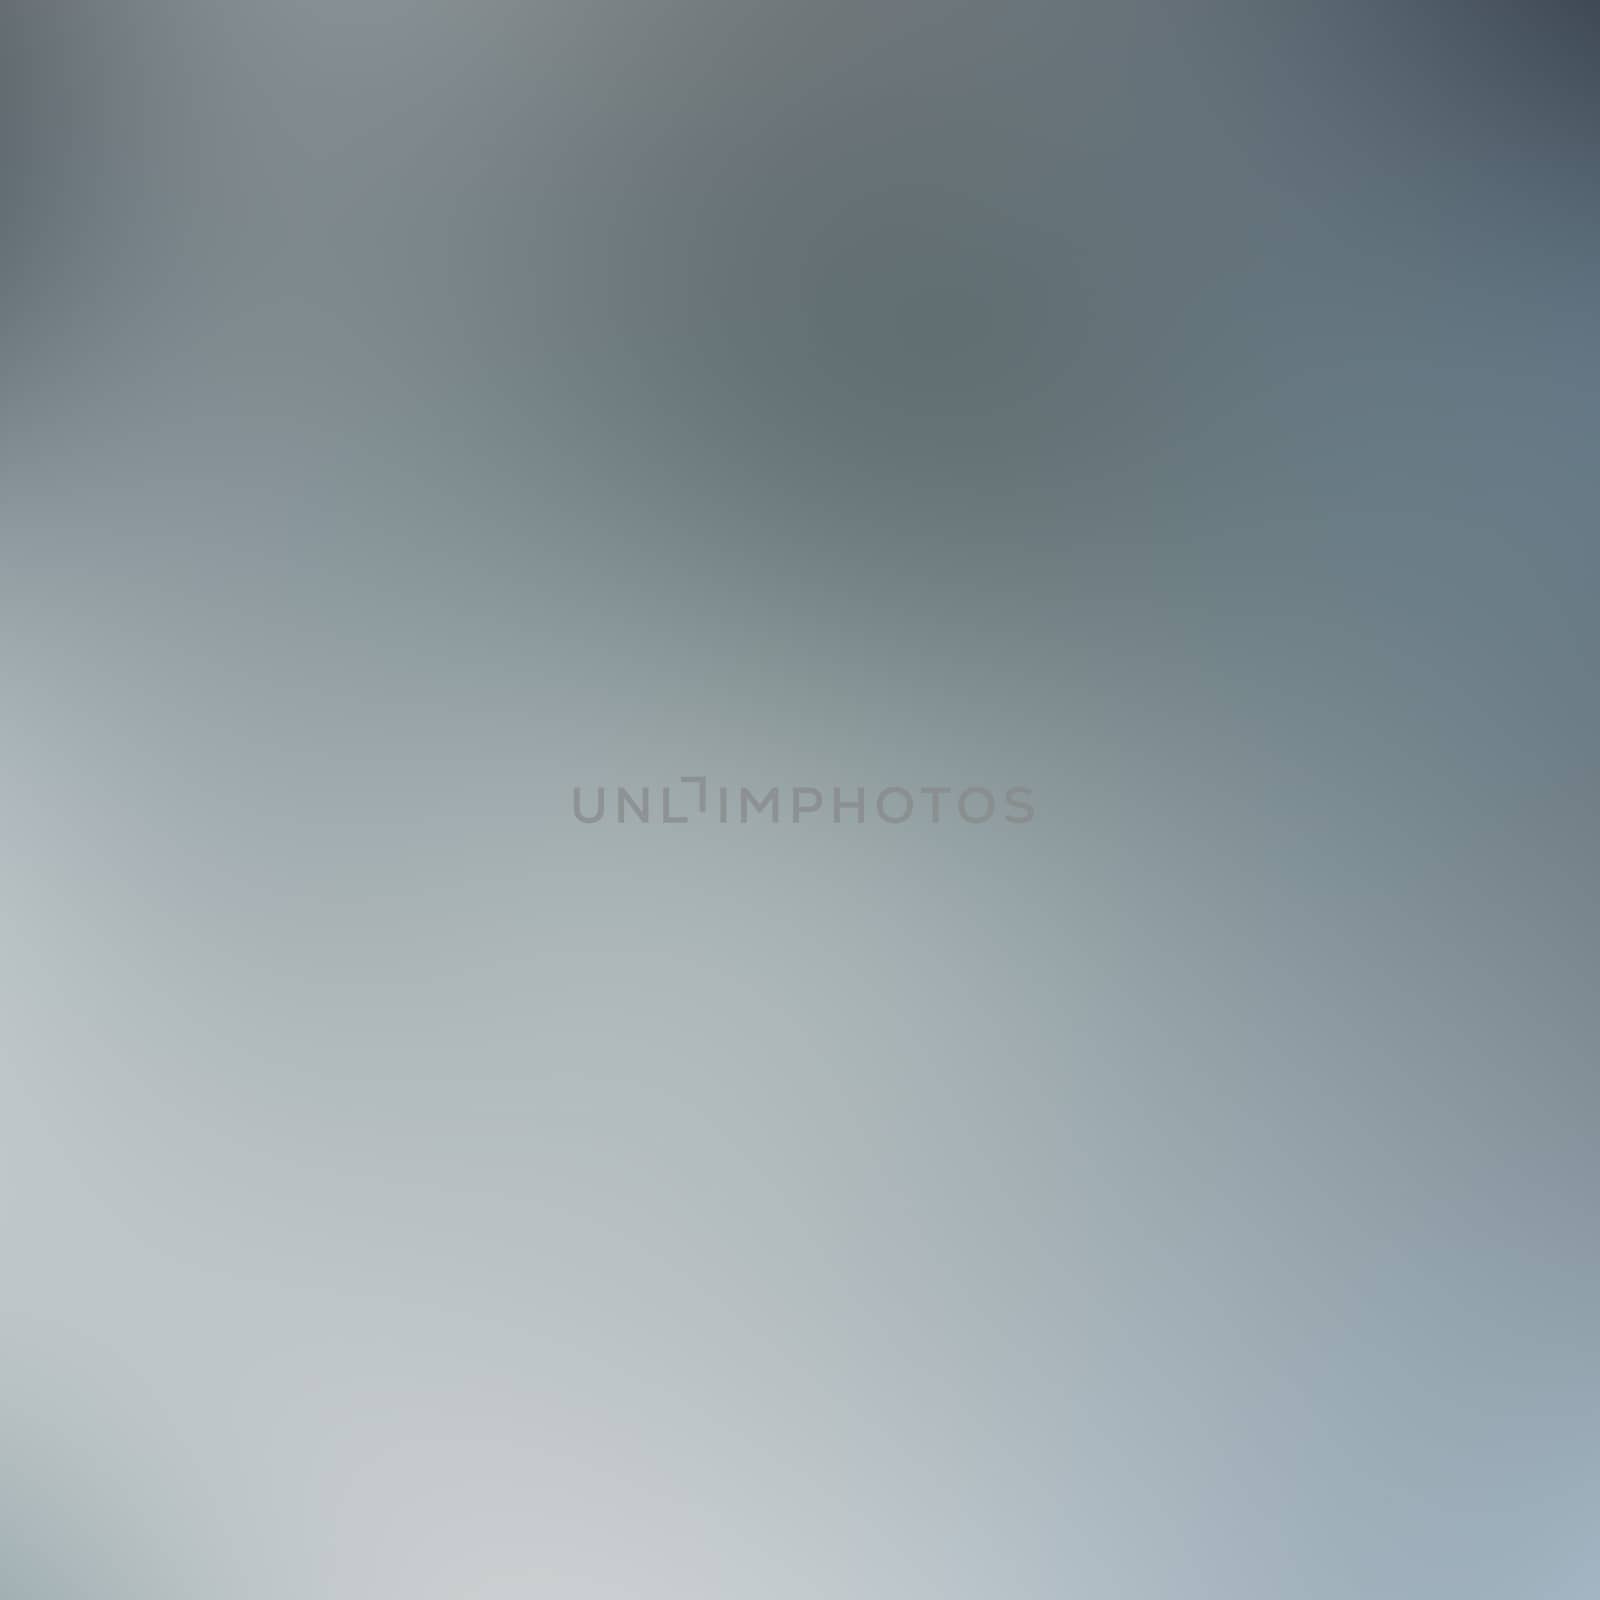 Silver grey tone. Abstract background wallpaper use for presenta by 2nix